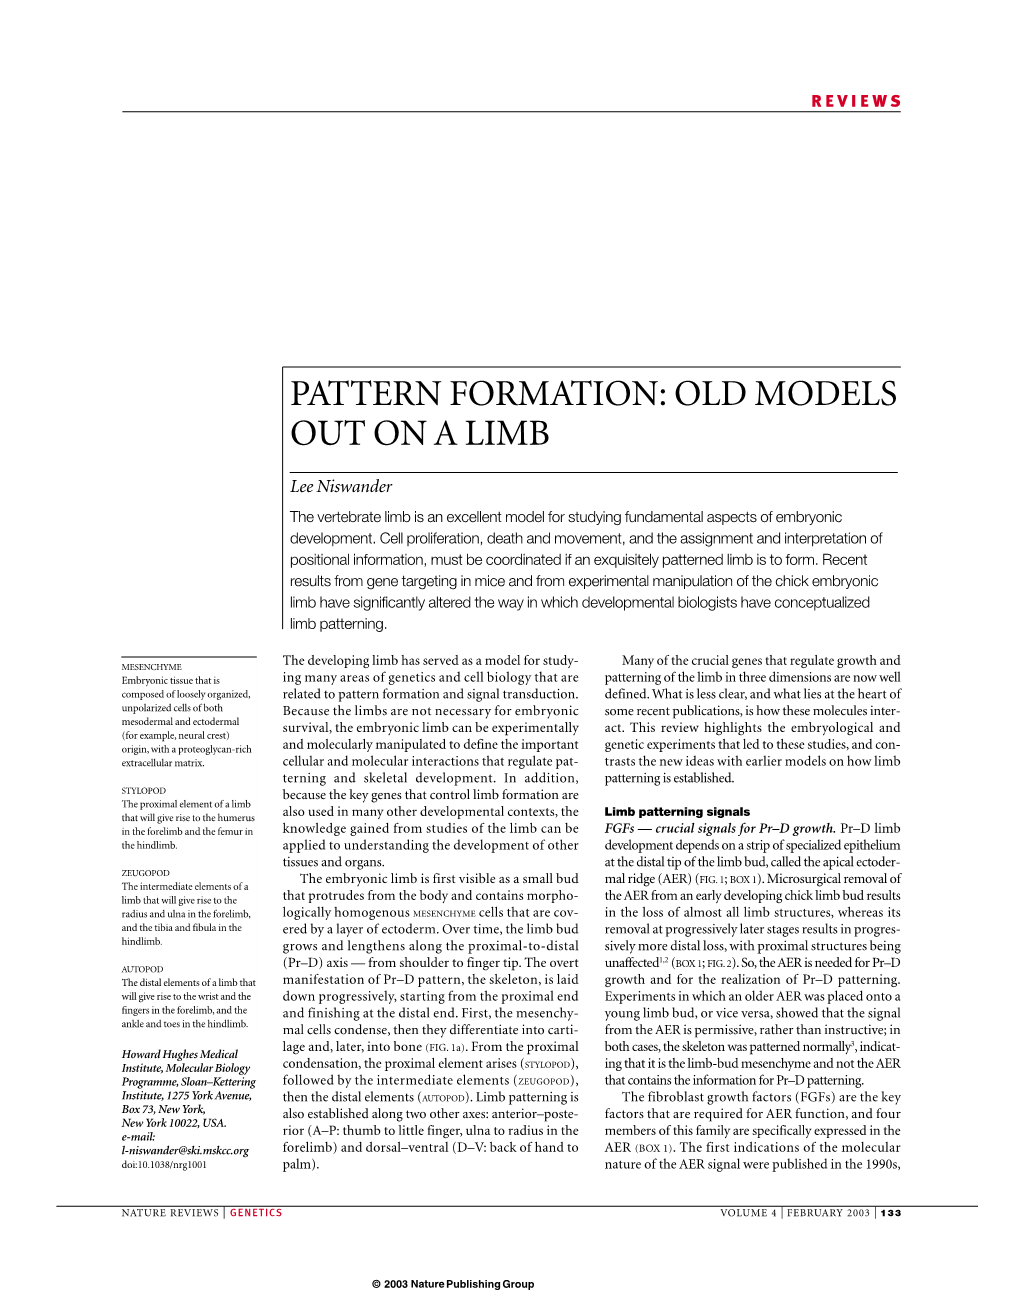 Pattern Formation: Old Models out on a Limb